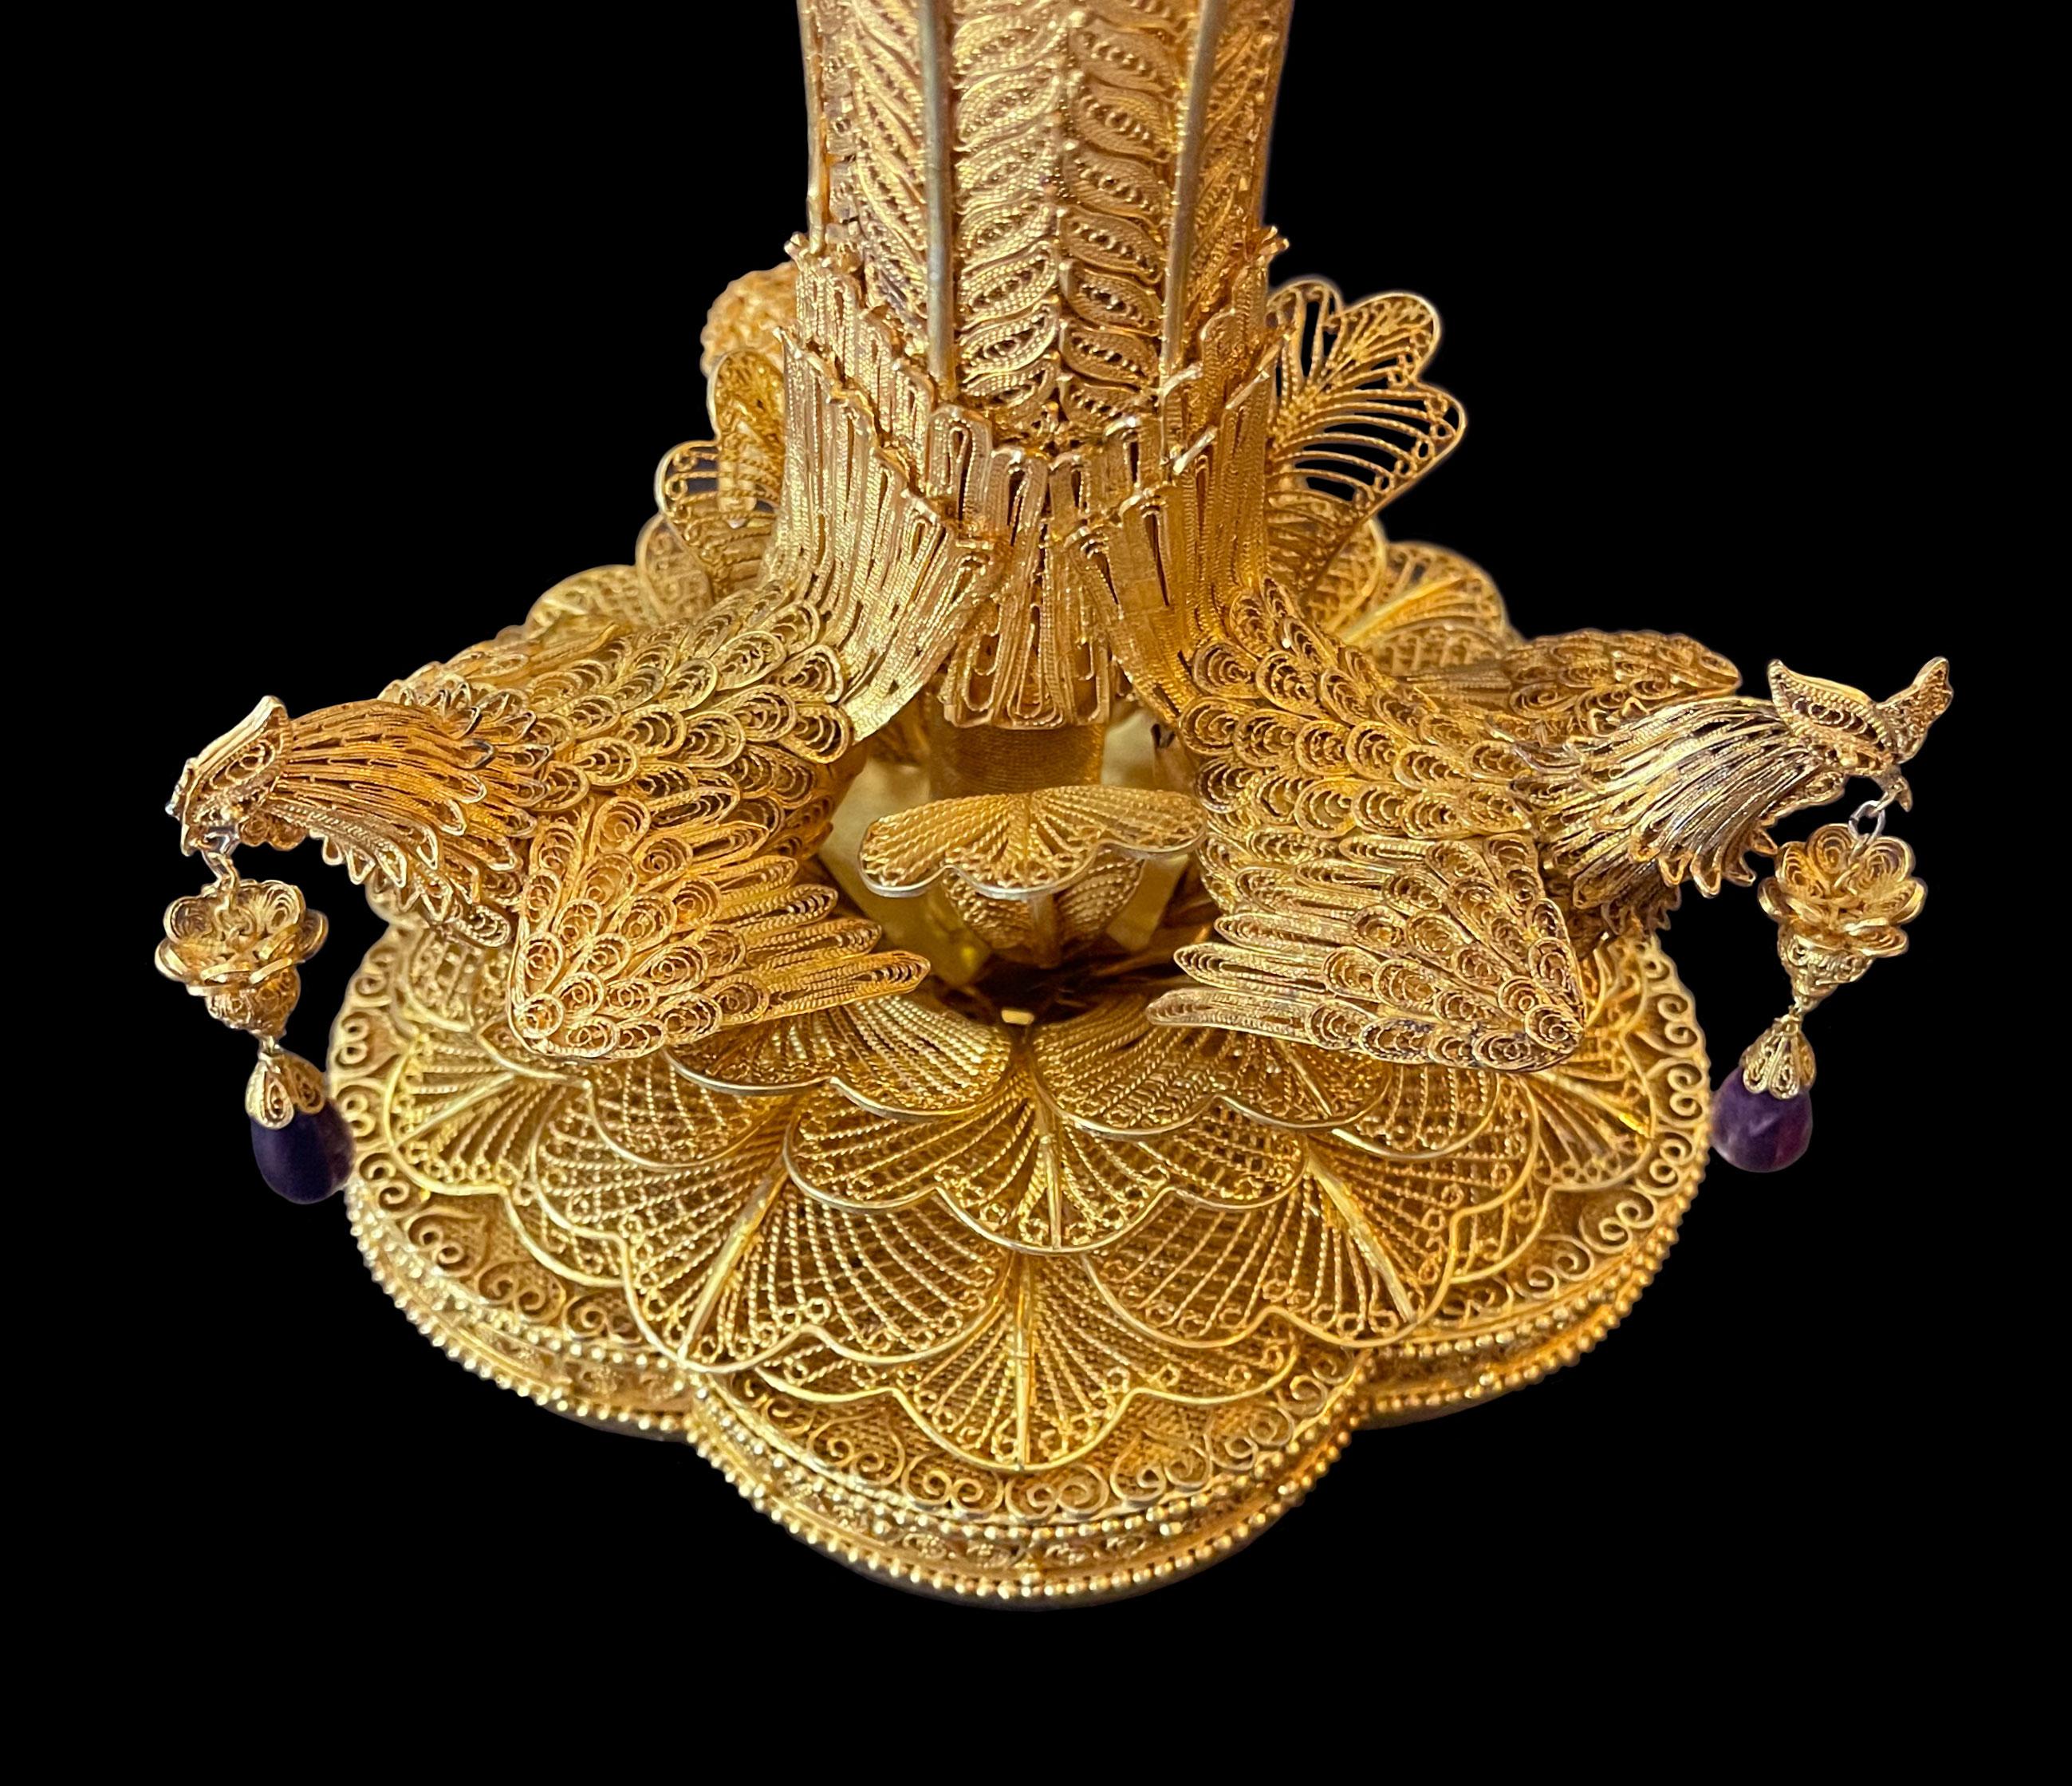 Chinese Enameled & Jeweled Gilt Silver Filigree Work Potpourri Urn, Circa 1900 For Sale 4